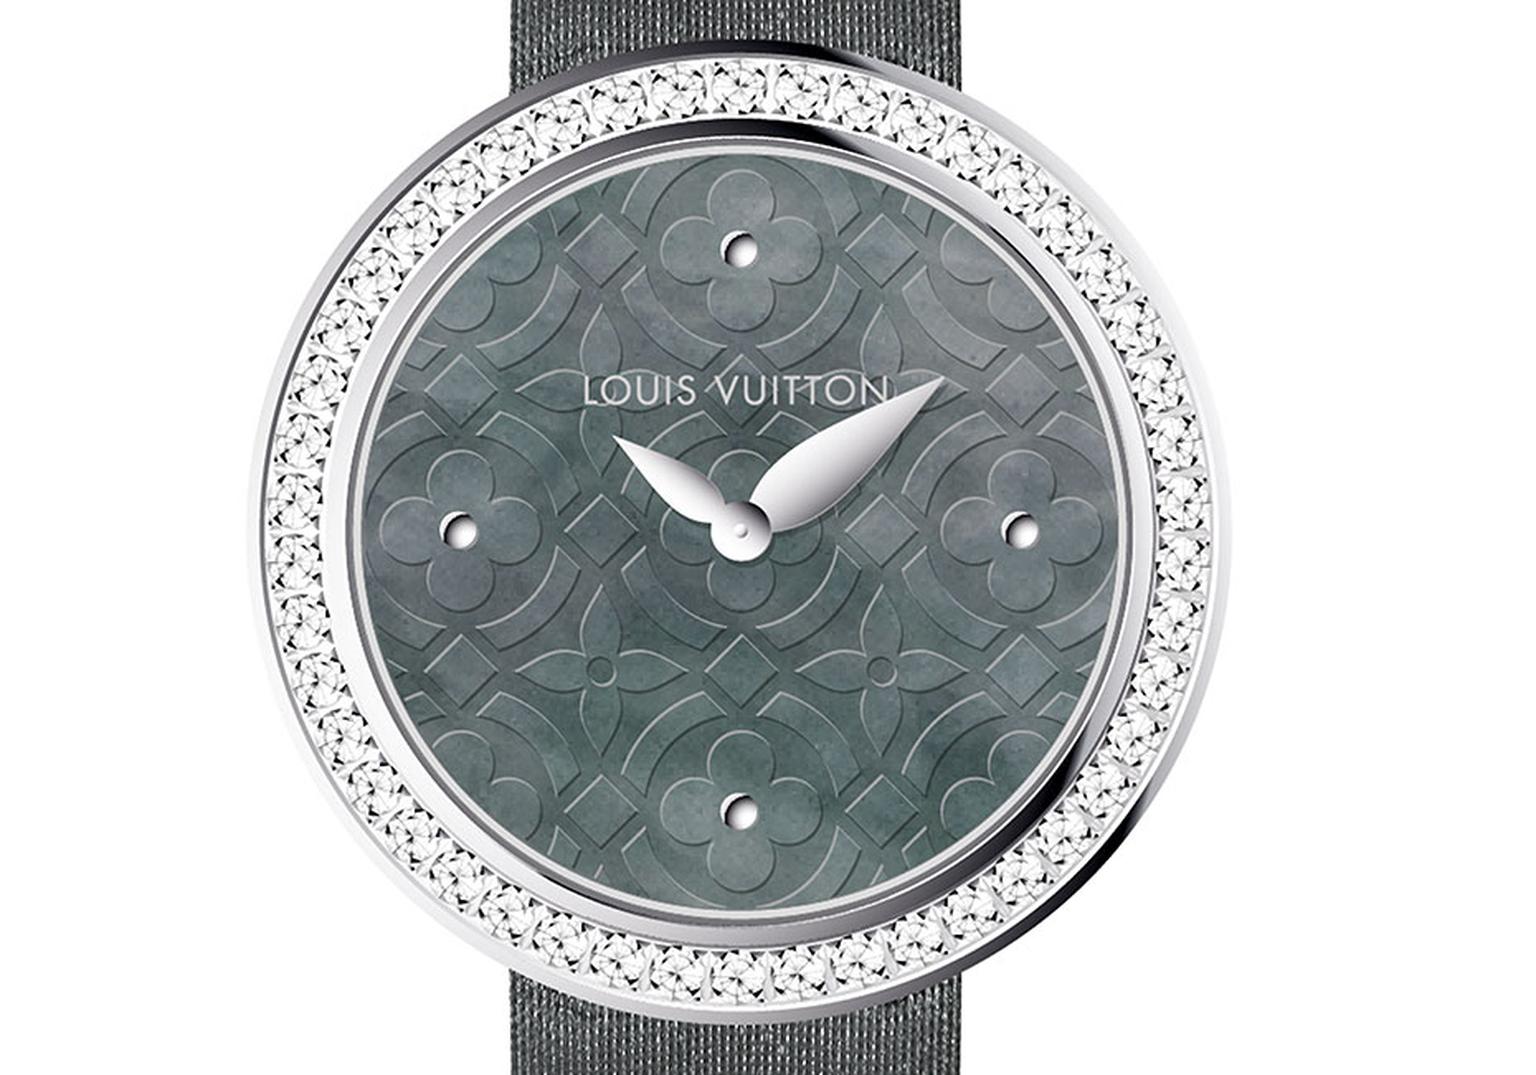 Louis Vuitton Dentelle de Monogram collection watch featuring a grey Polynesian mother-of-pearl dial surrounded by a diamond bezel and a grey satin strap.